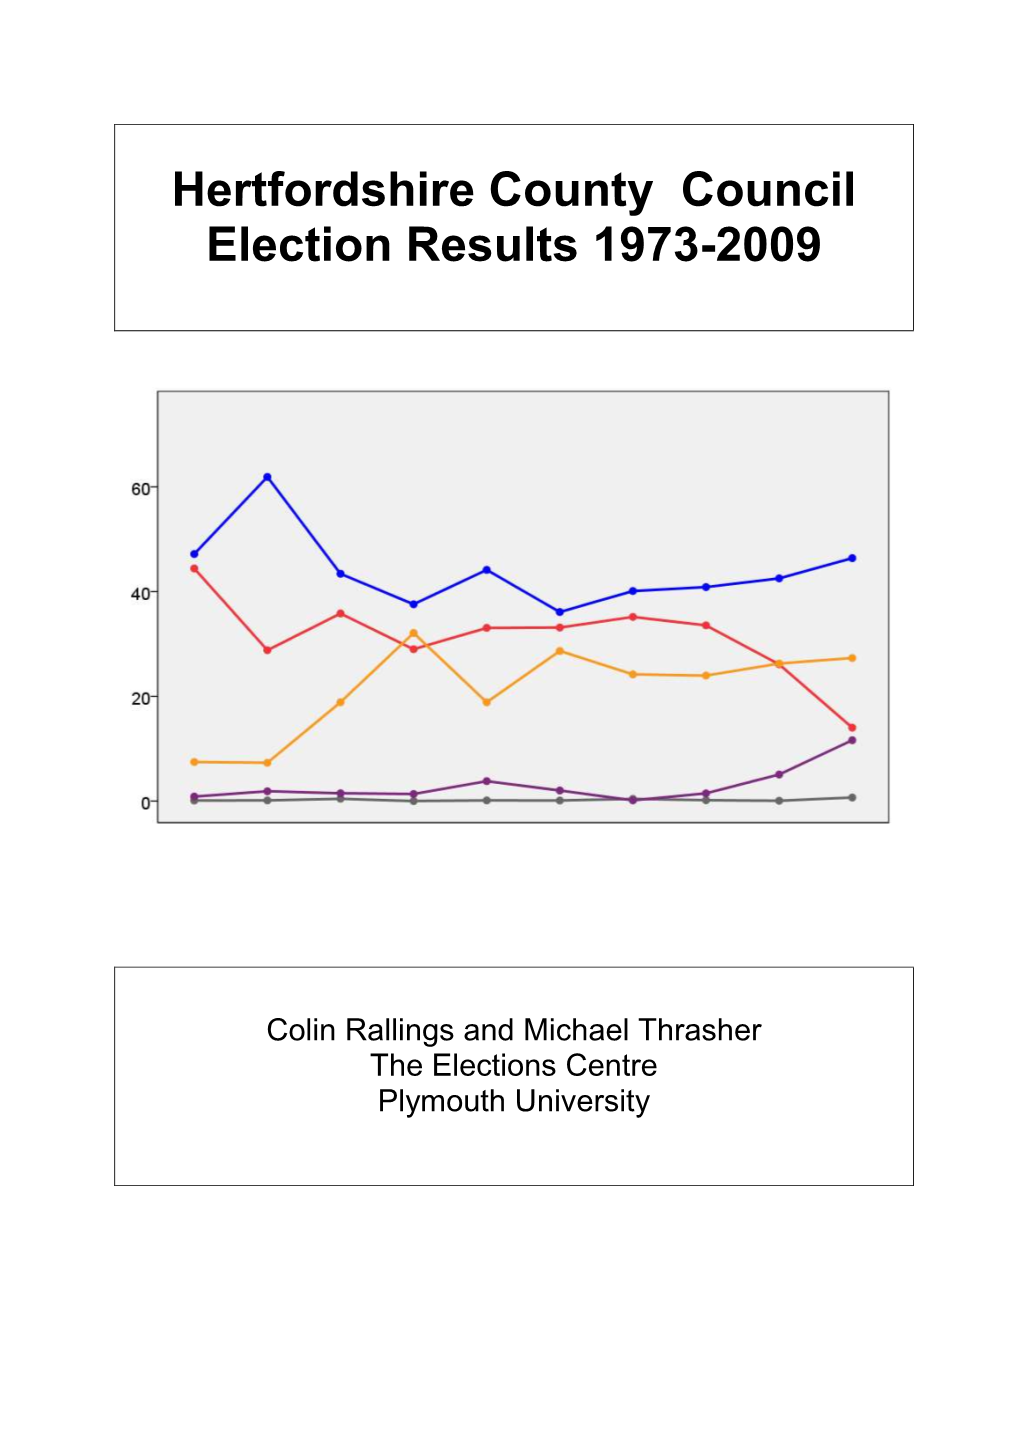 Hertfordshire County Council Election Results 1973-2009